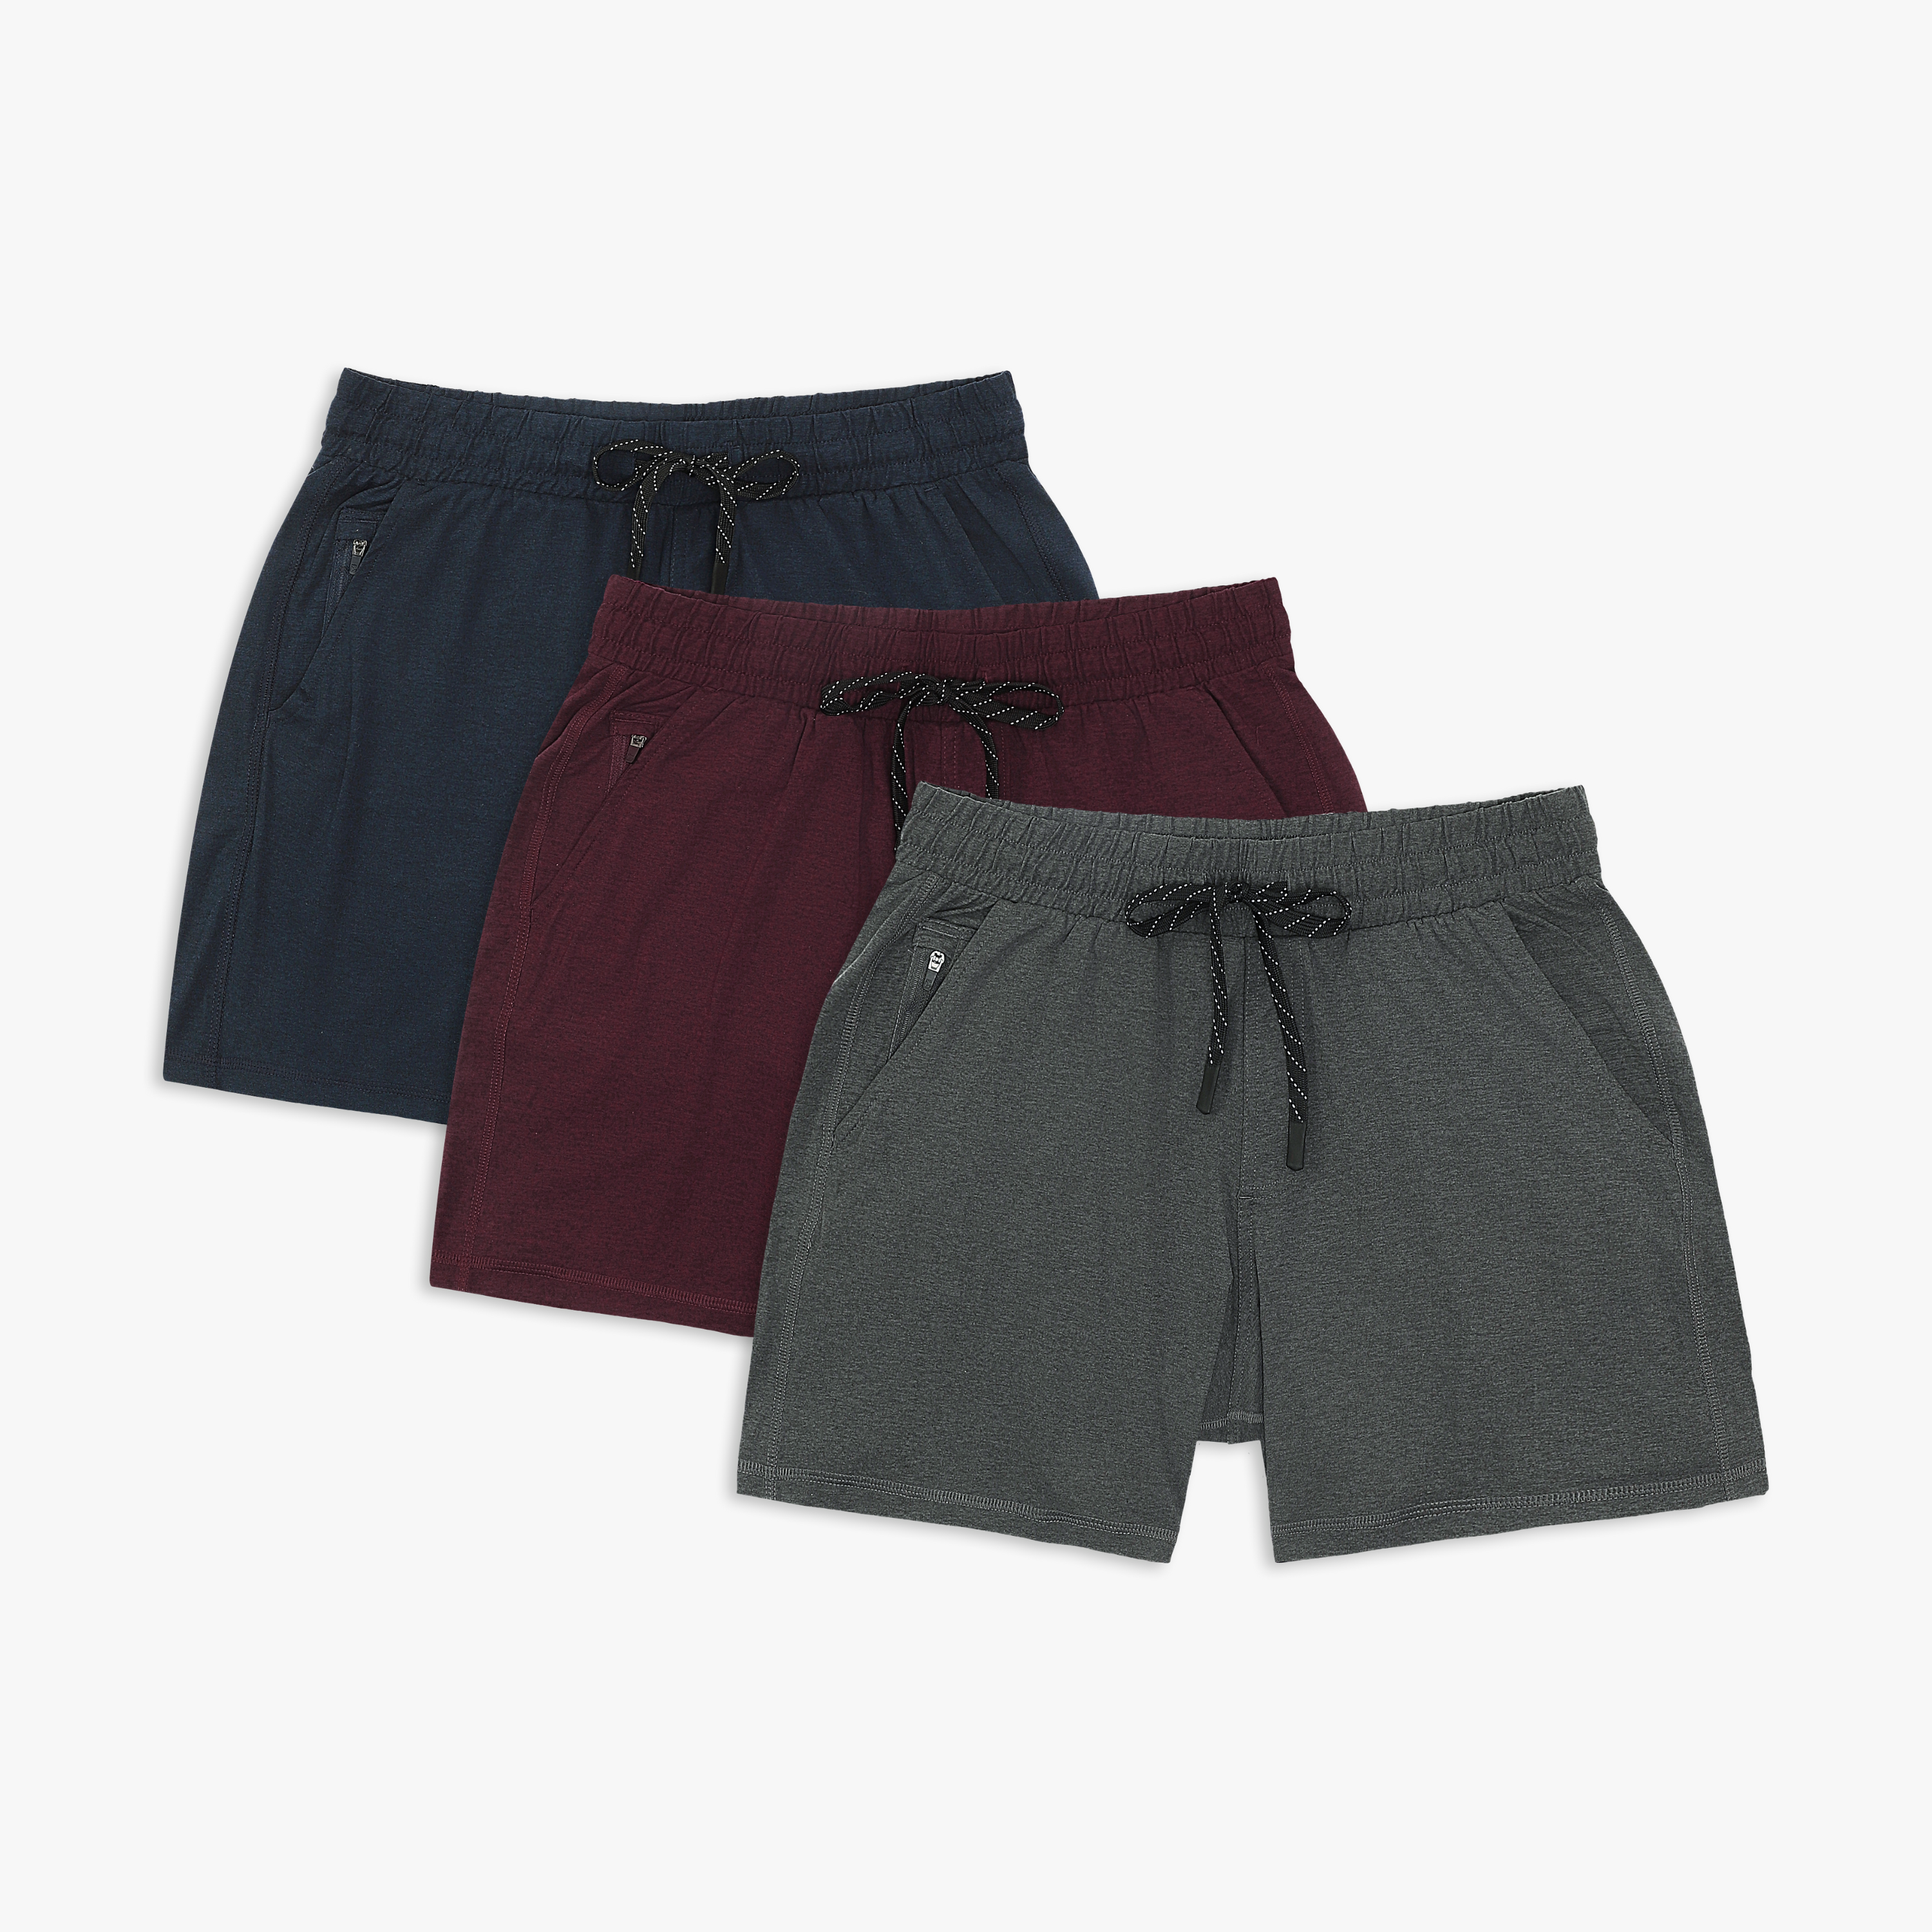 Tech Short 5.5" Charcoal, Maroon, and Navy